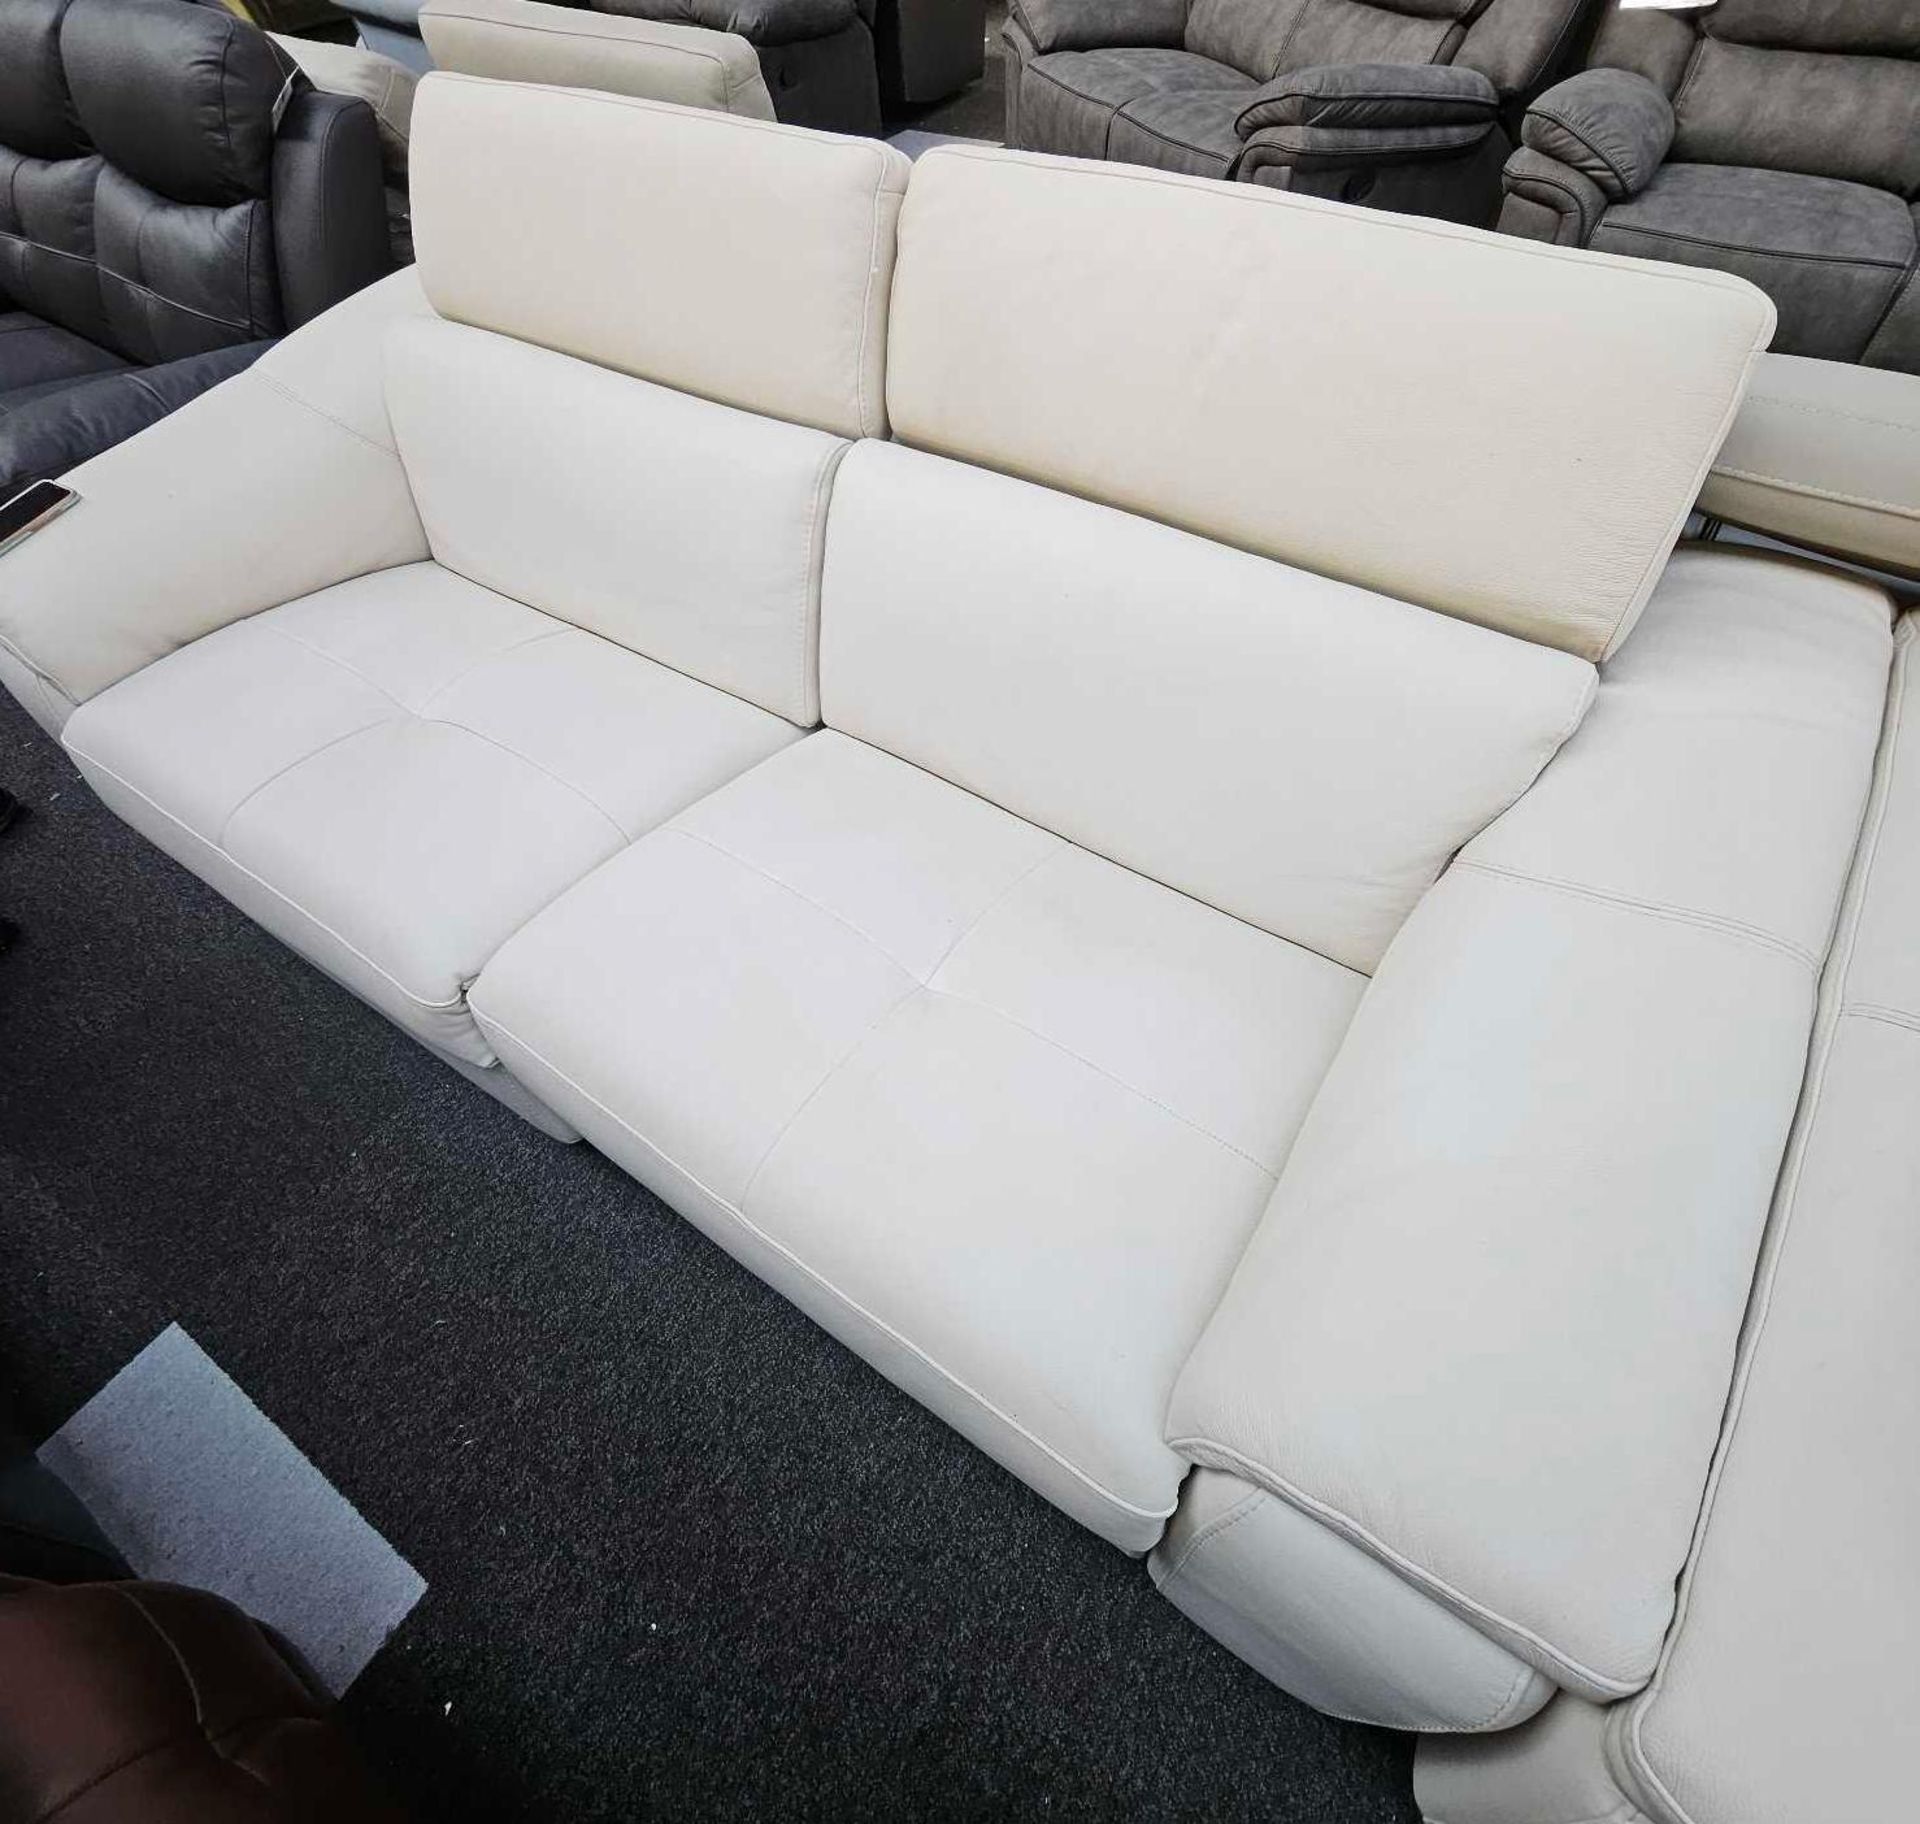 *EX DISPLAY* Nicolette 3 + 1 + 1 sofa with power reclining headrest and 2 power chairs in cream.